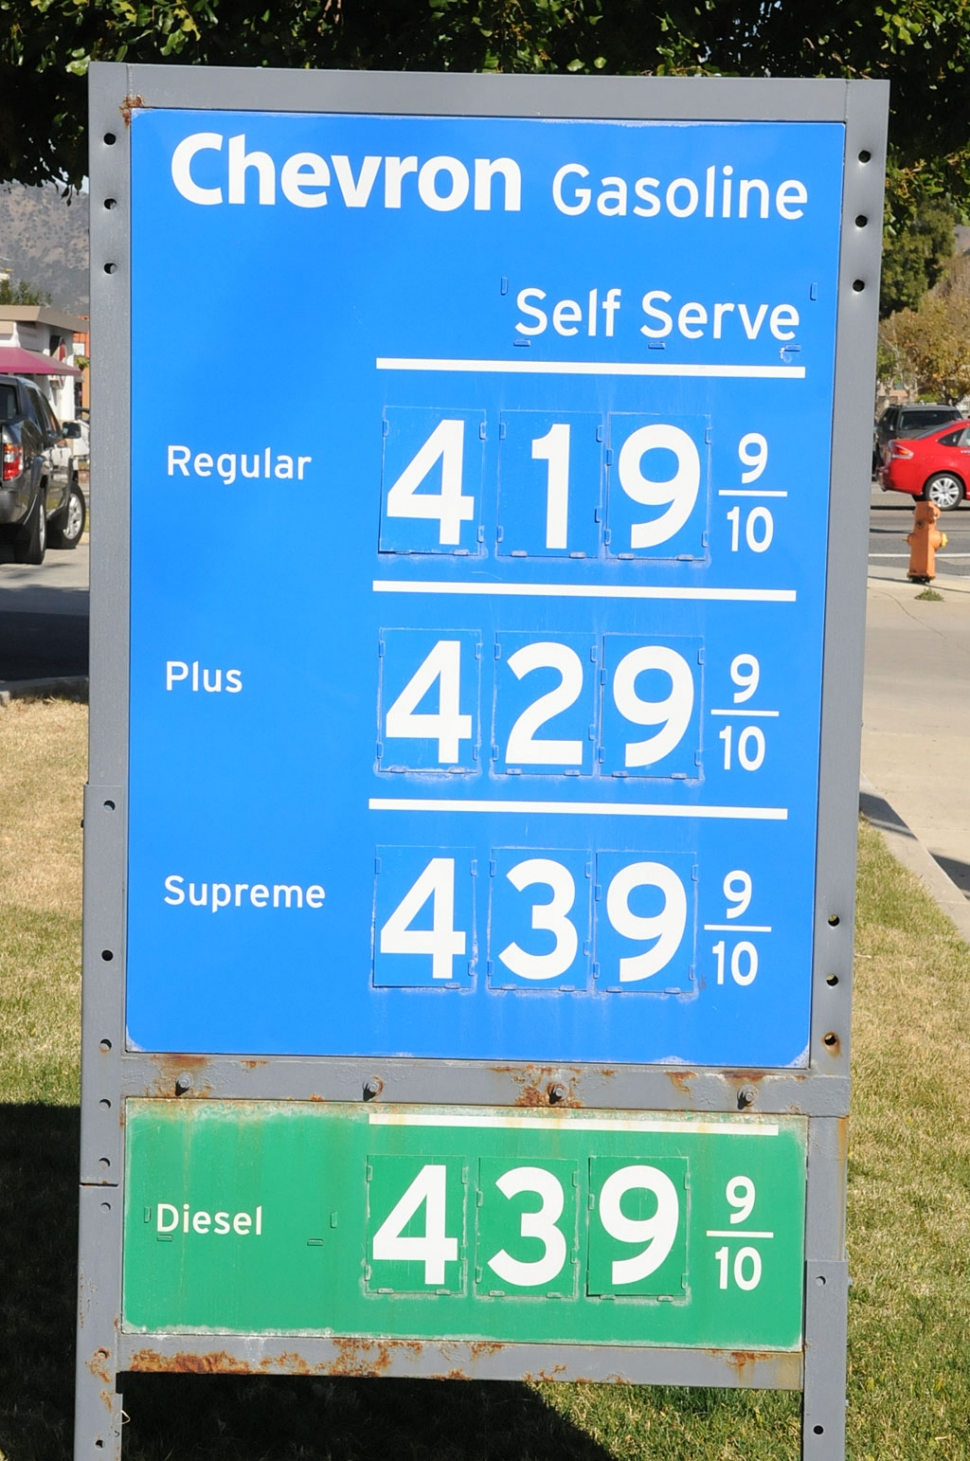 In 2008 Obama said that “under my policy energy prices will soar” and that he would bankrupt the coal industry. Obama supporters can now rejoice; that day has come! Since photo taken in a.m. by the afternoon price jumped to $4.30.